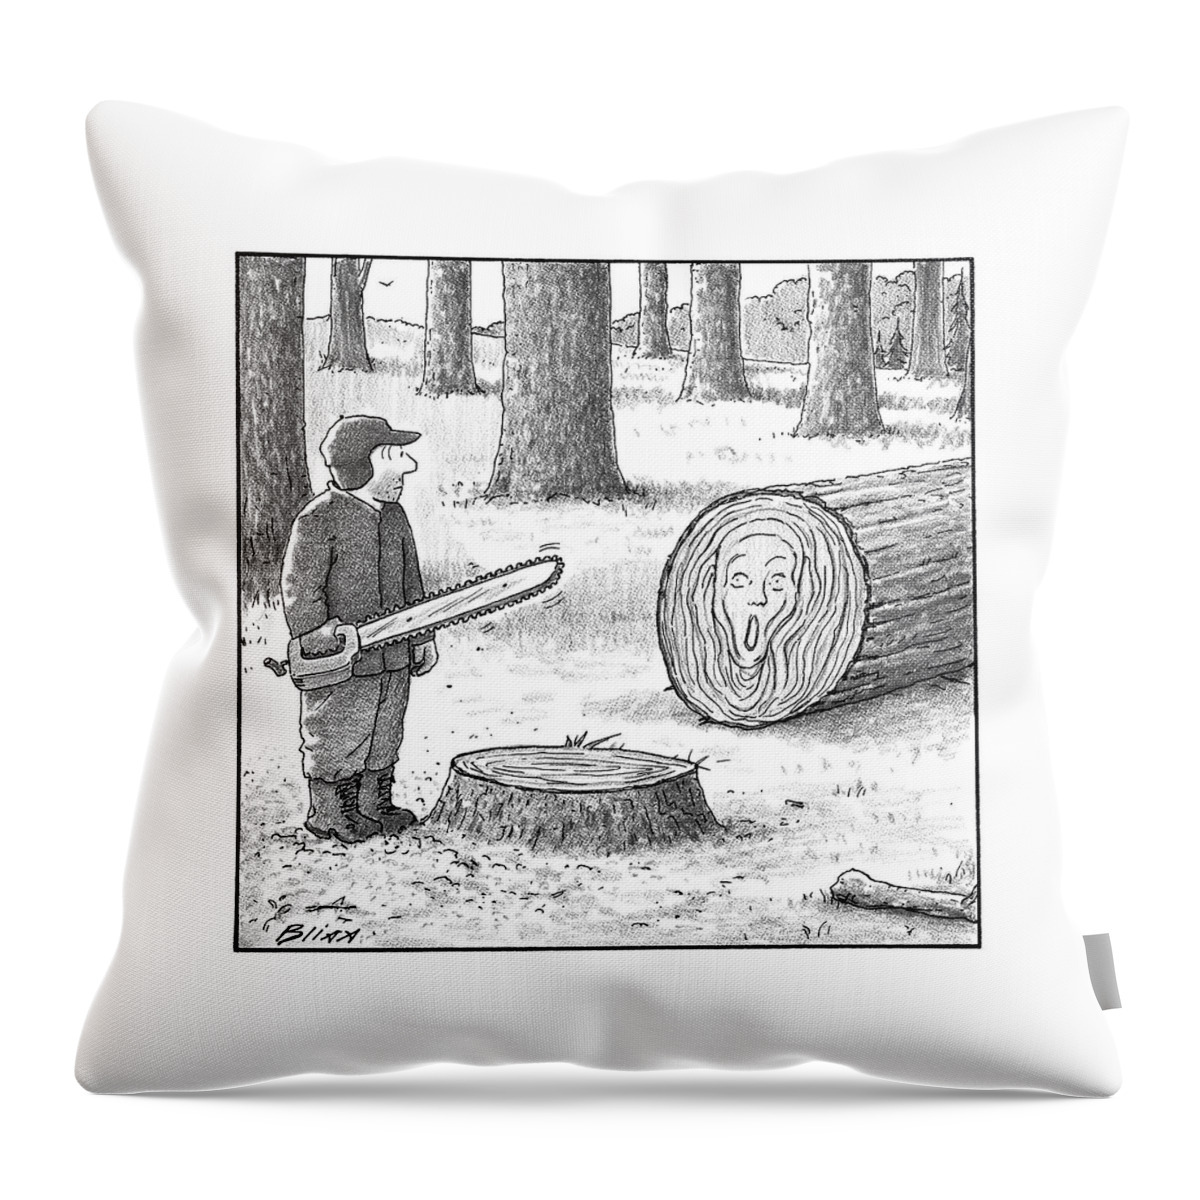 A Man Who Has Just Cut Down A Tree Sees That Throw Pillow